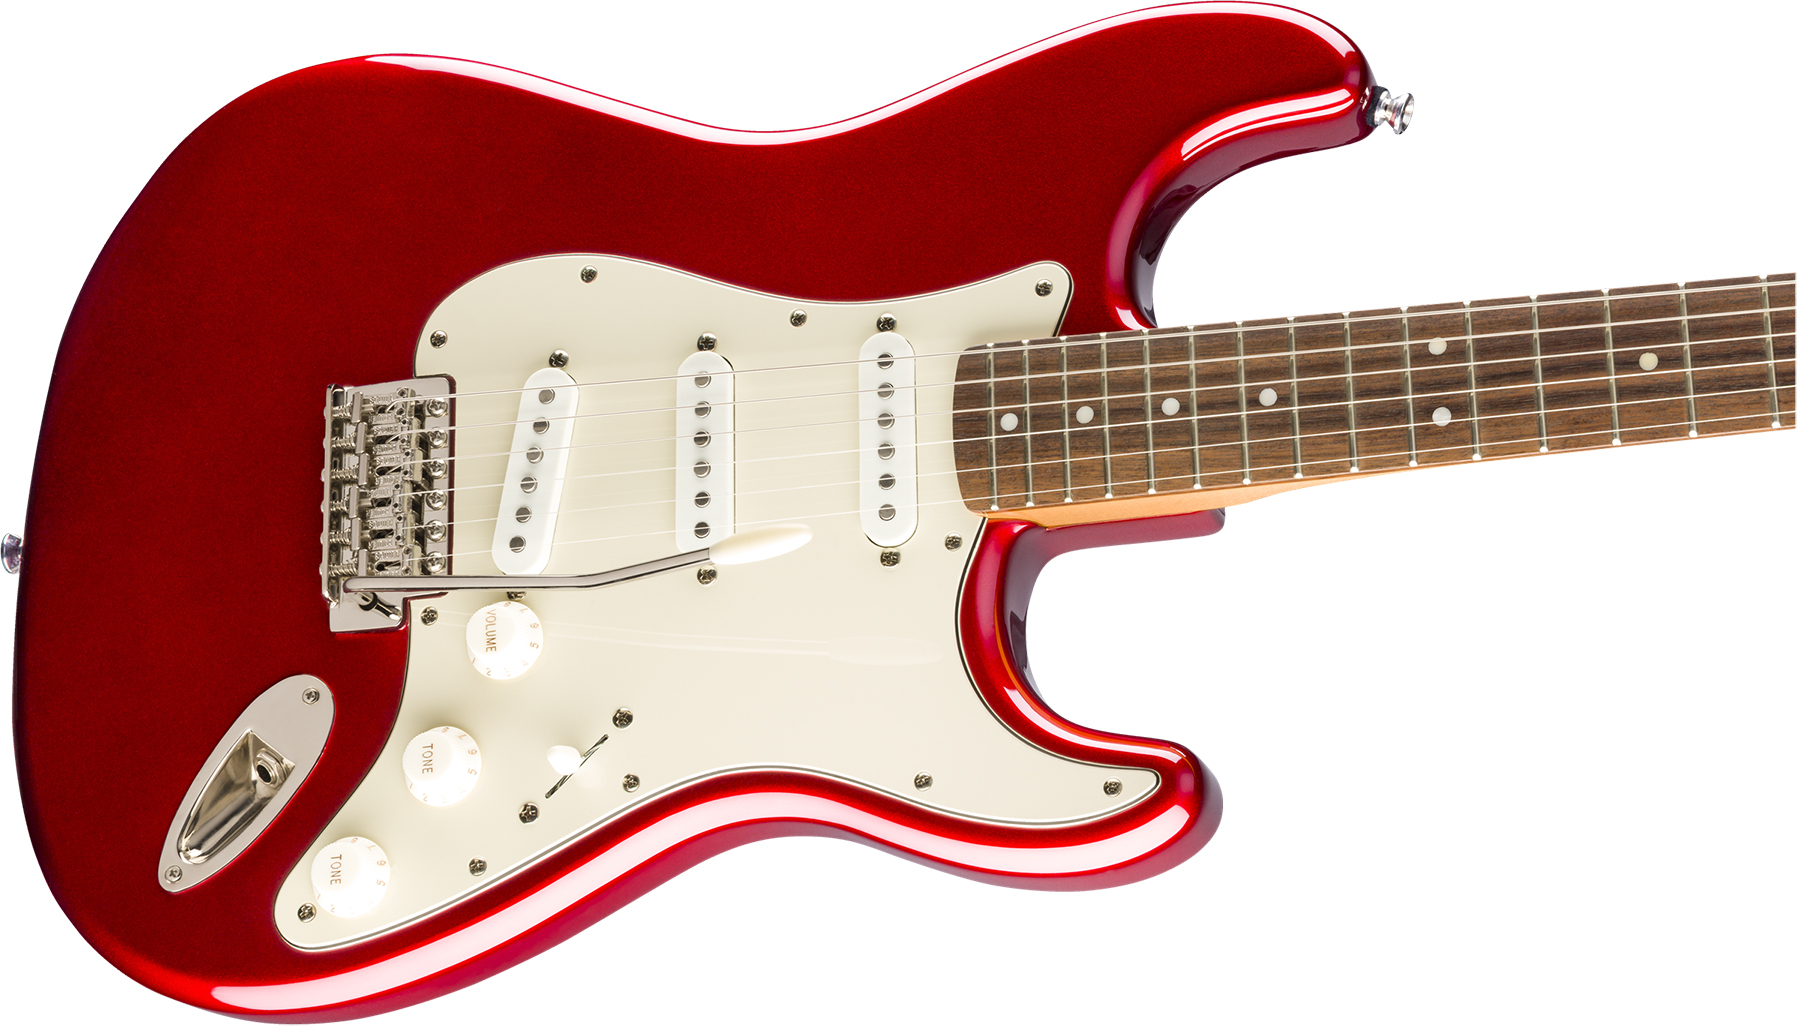 Squier Strat '60s Classic Vibe 2019 Lau 2019 - Candy Apple Red - E-Gitarre in Str-Form - Variation 2